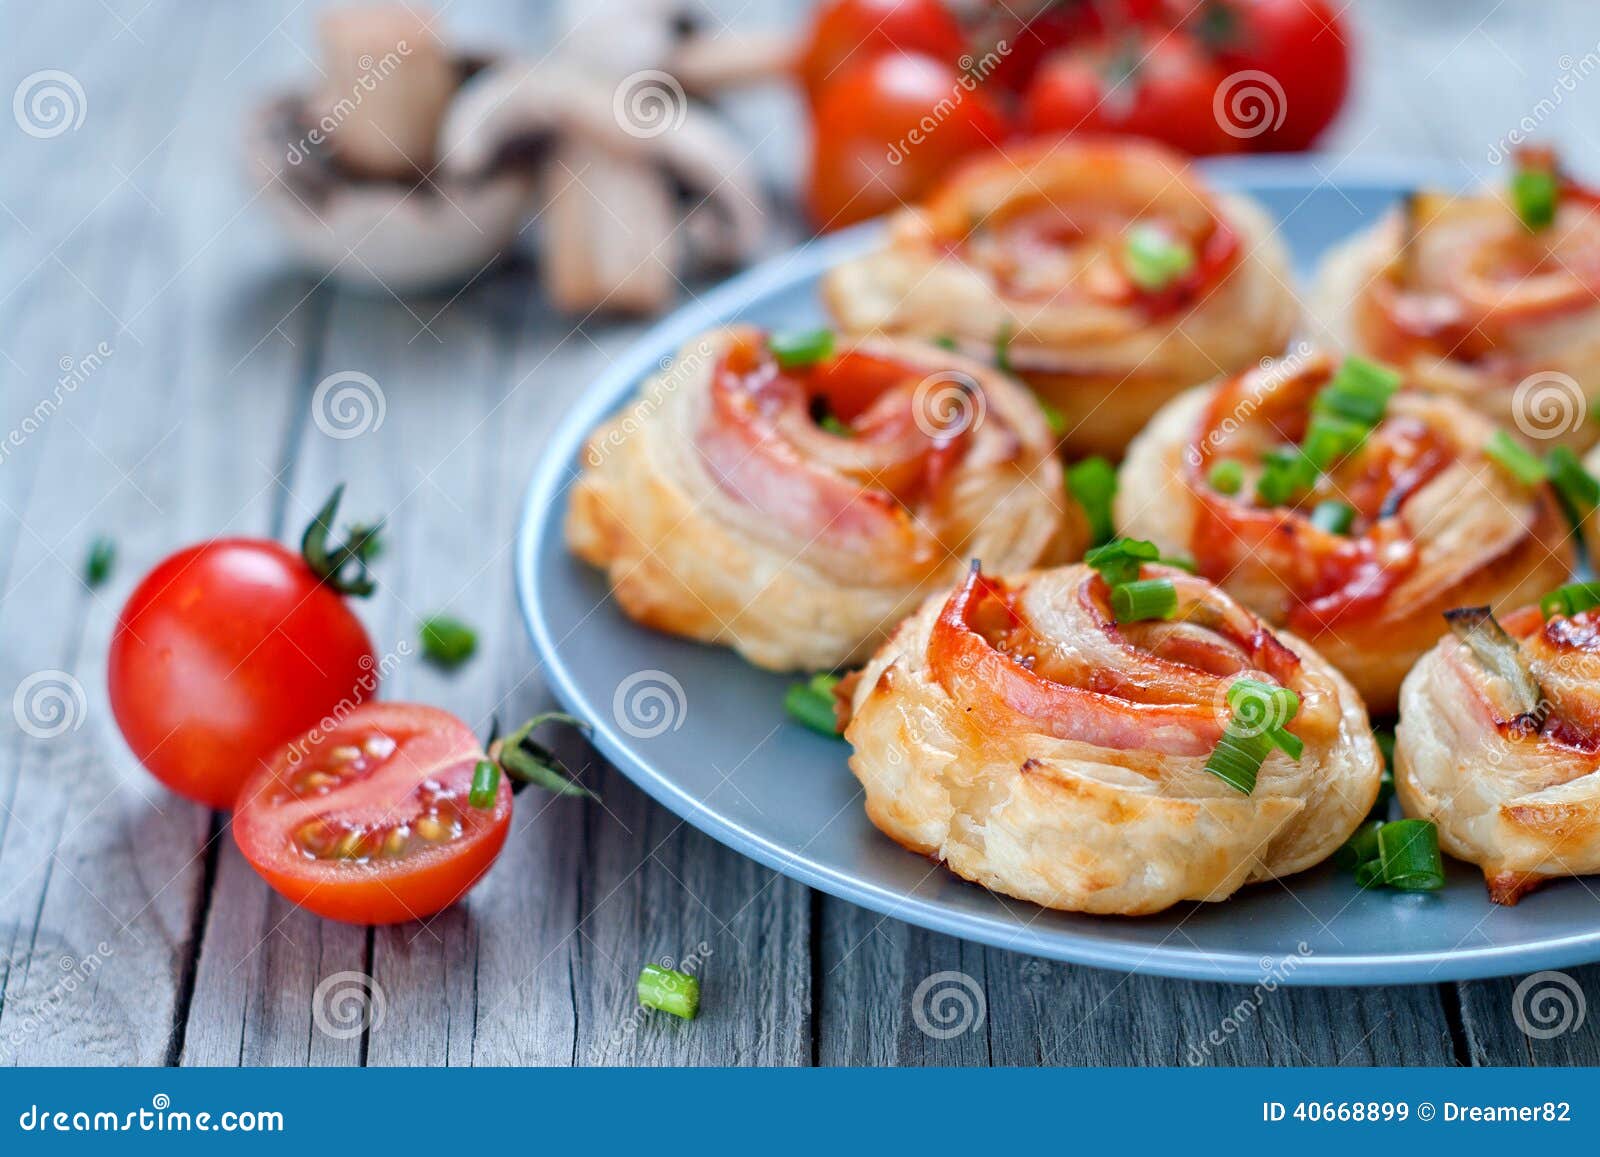 puff pastry rolls with ham and chese. baked snacks